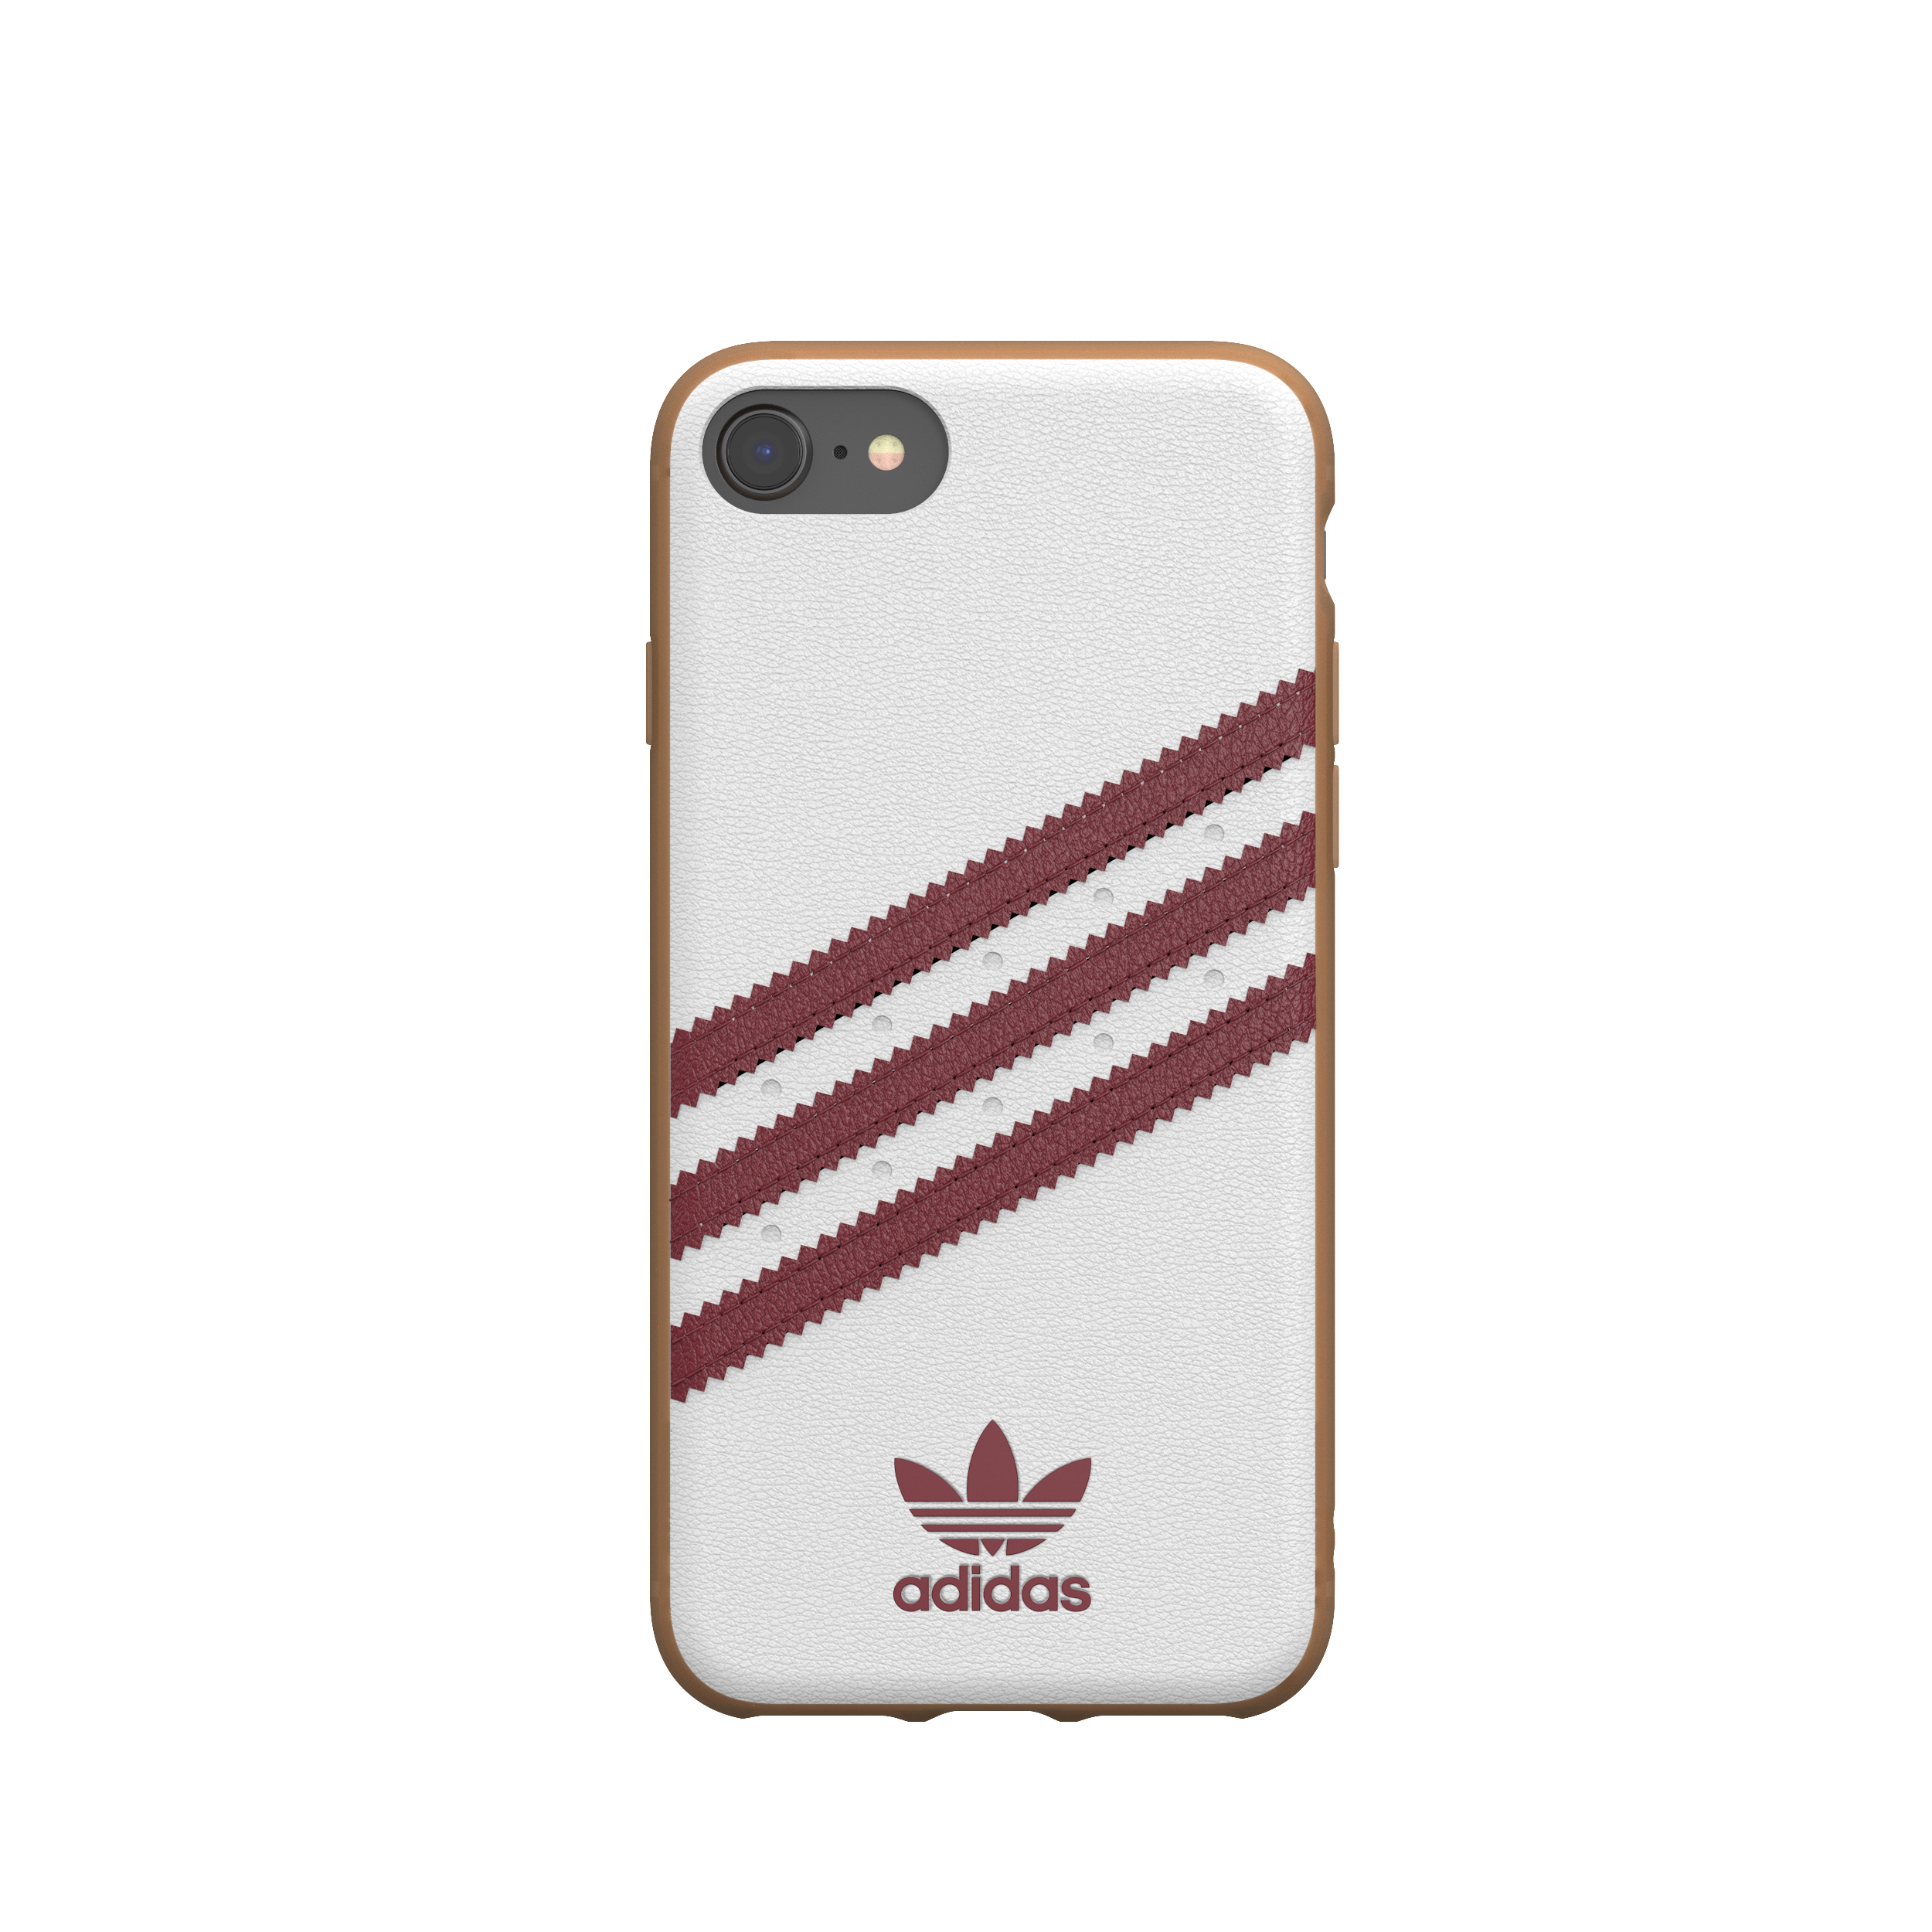 ORIGINALS (2020), OR Backcover, SE iPhone Apple, Moulded iPhone 6, Weiß/Rot iPhone 8, ADIDAS Case, 7, iPhone